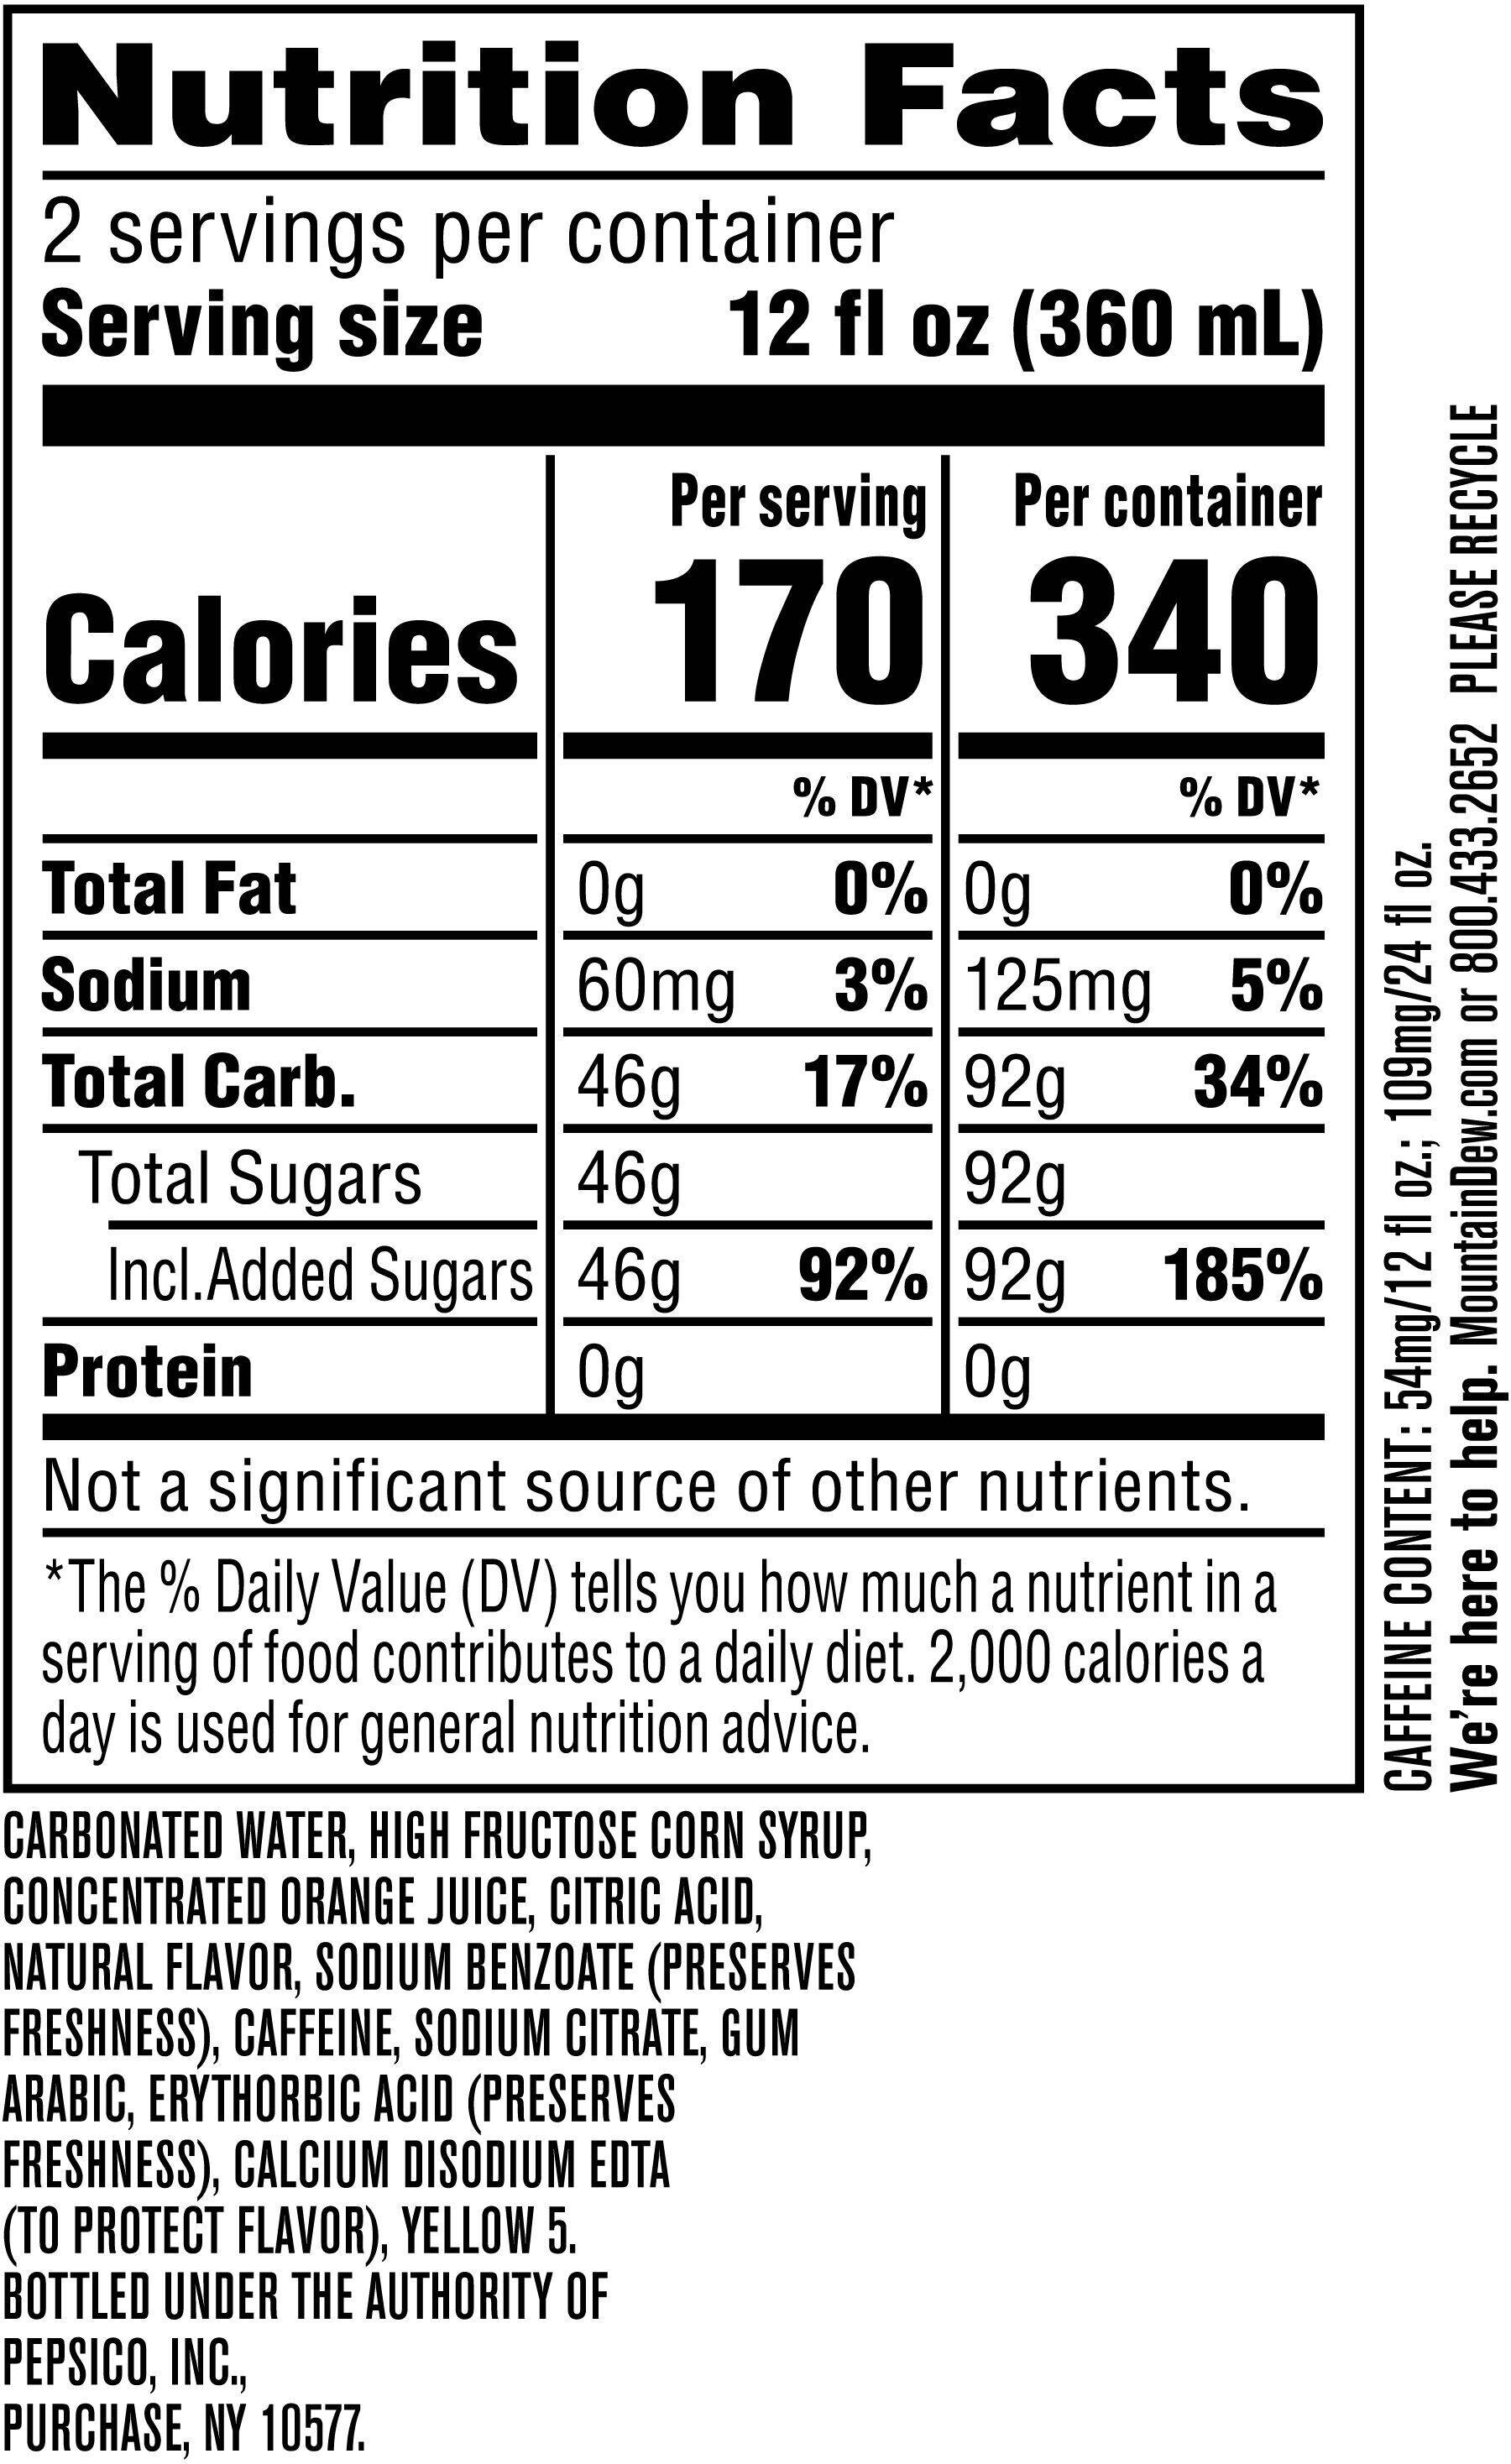 Image describing nutrition information for product Mtn Dew